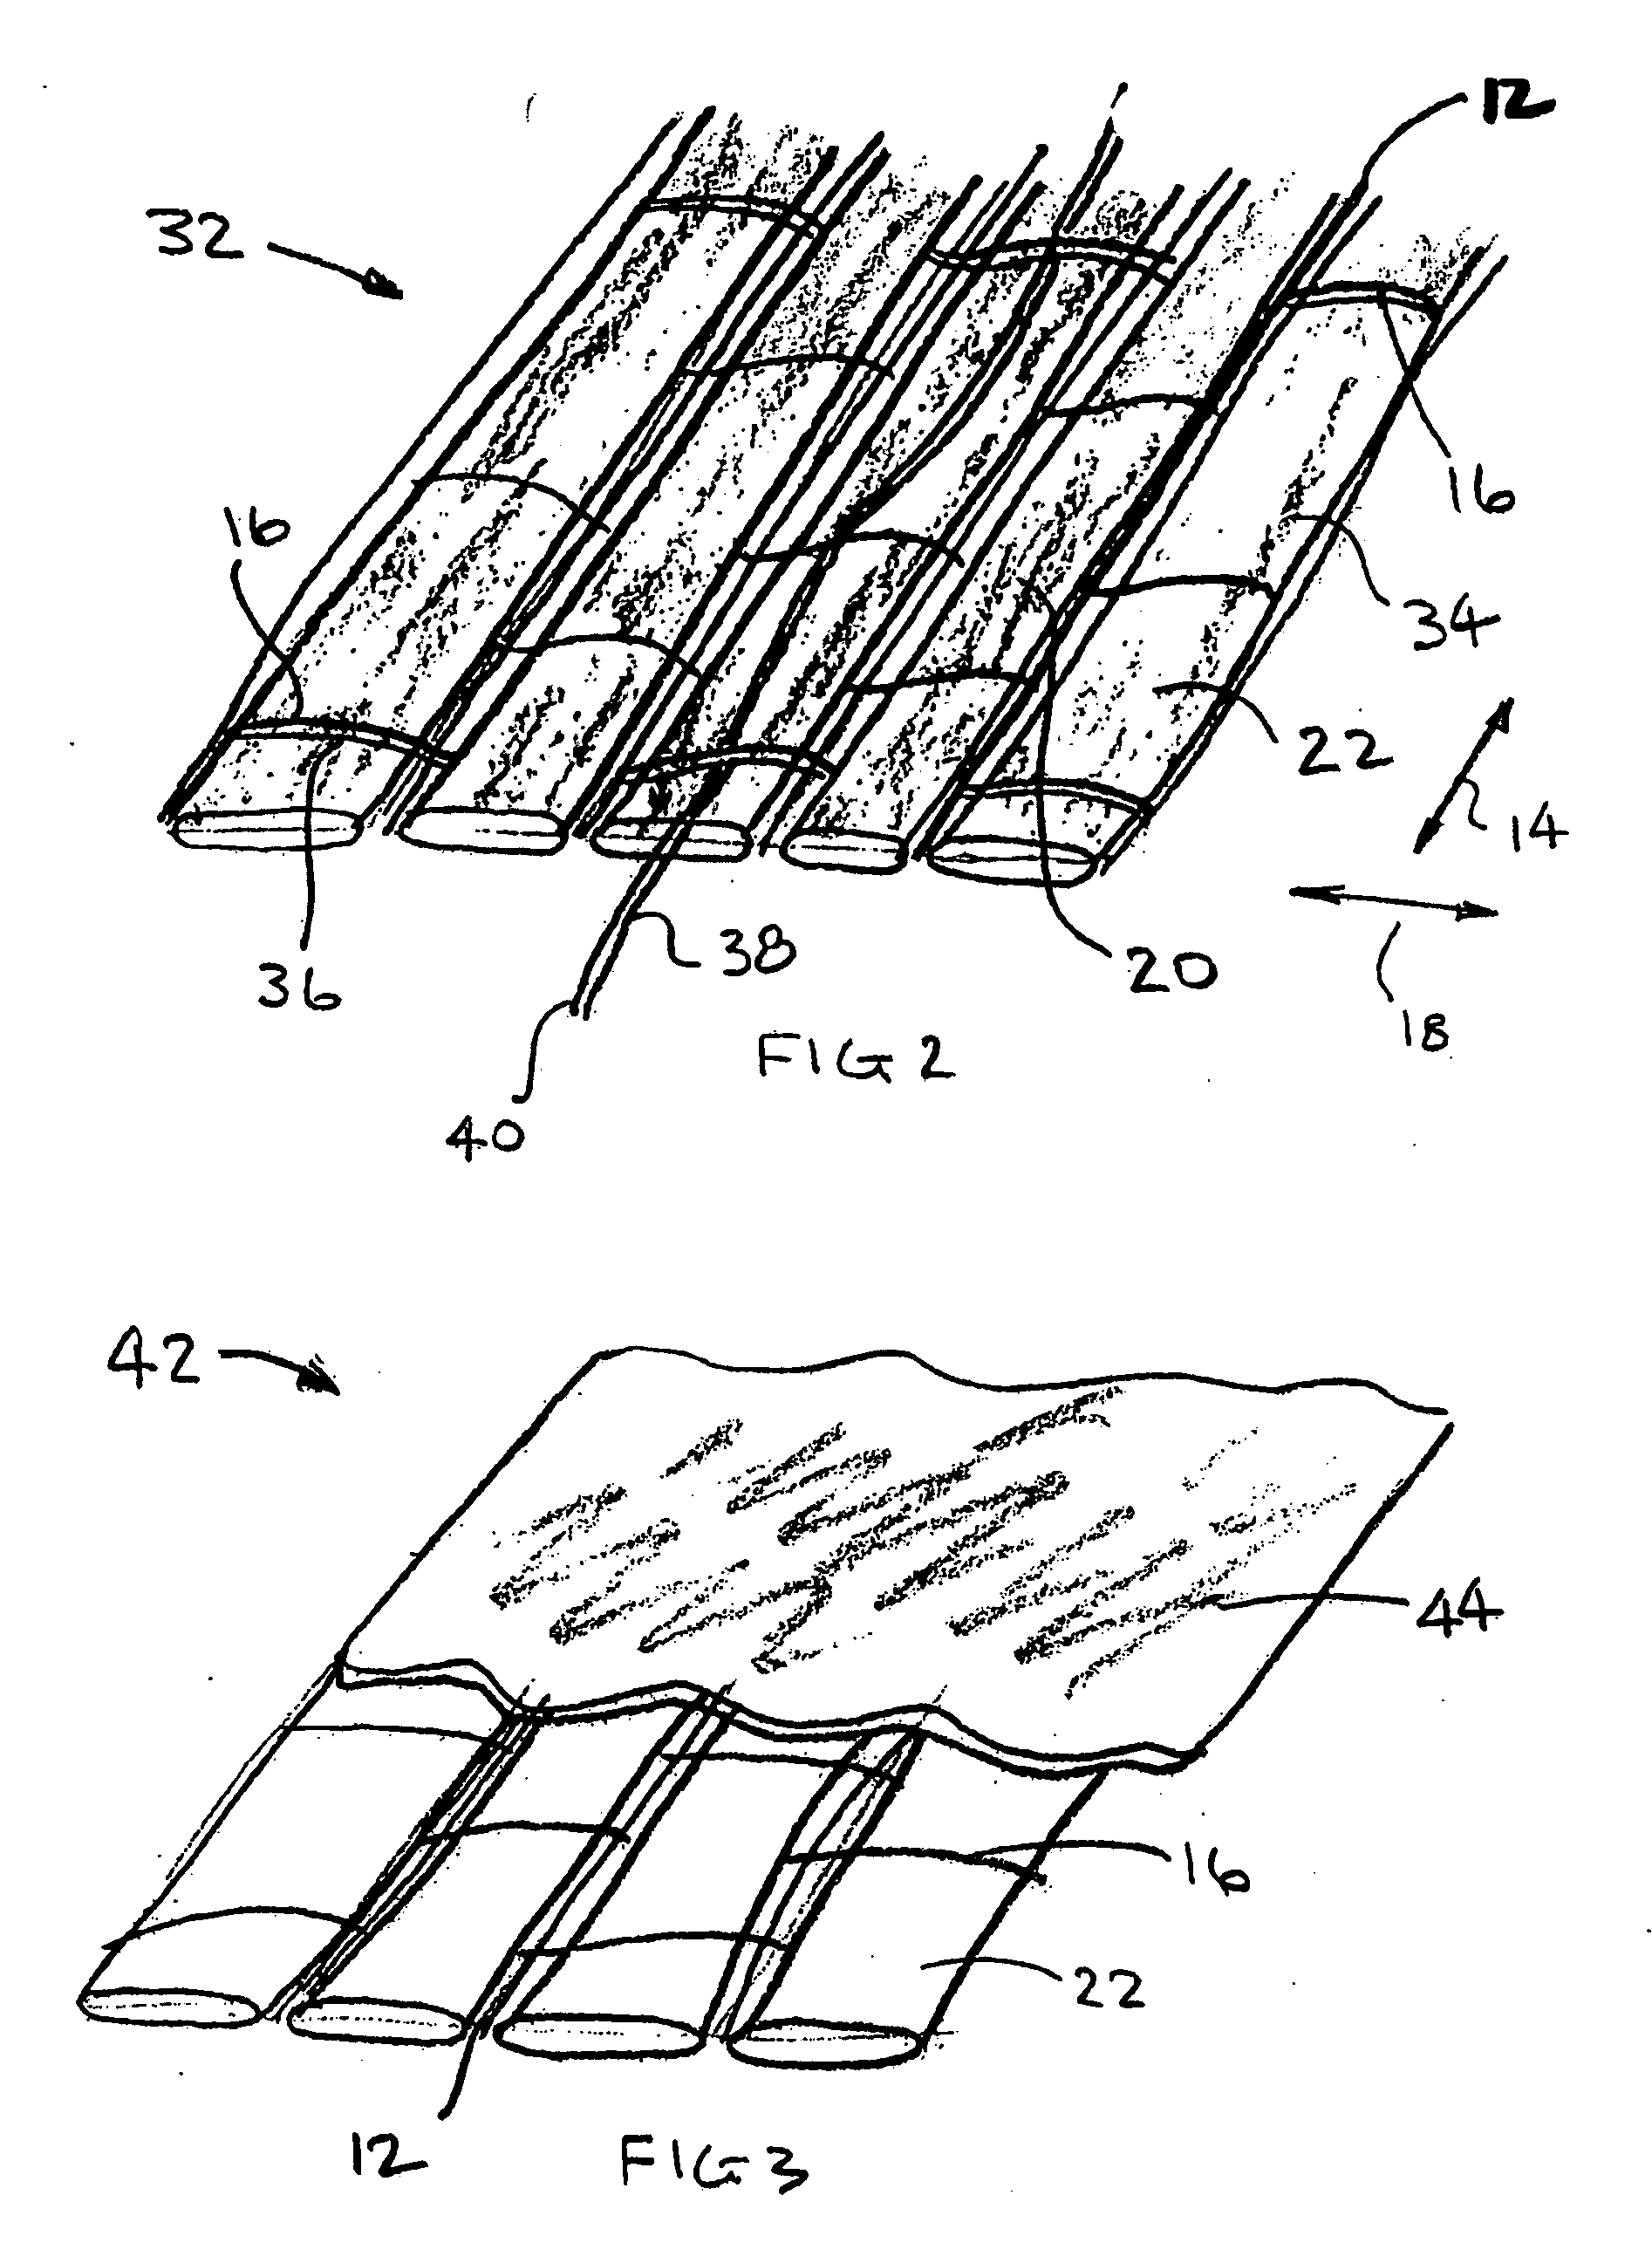 Substrate incorporating non-woven elements